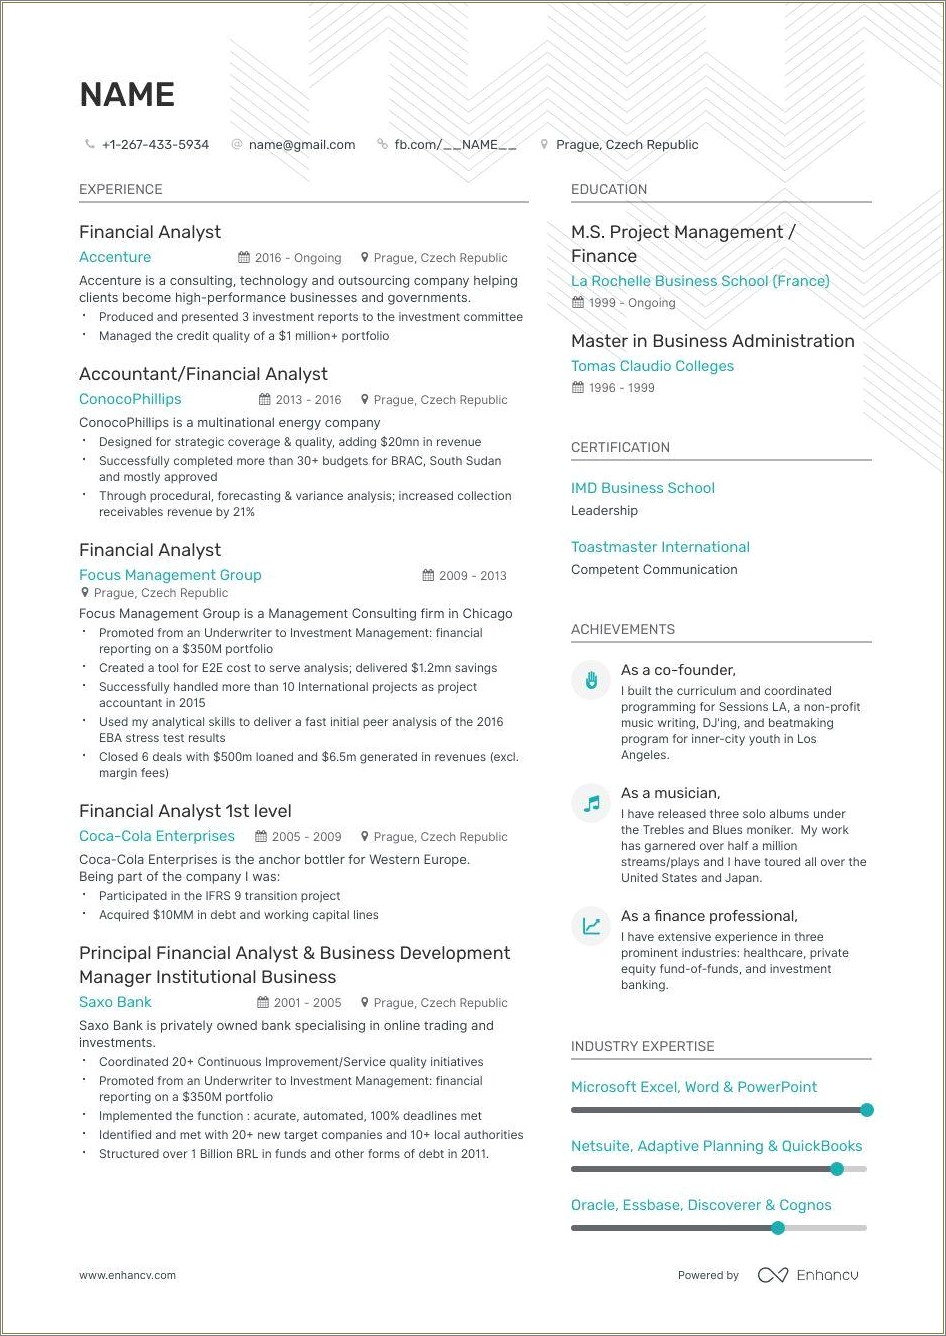 Executive Summary For Accounting And Finance Resume